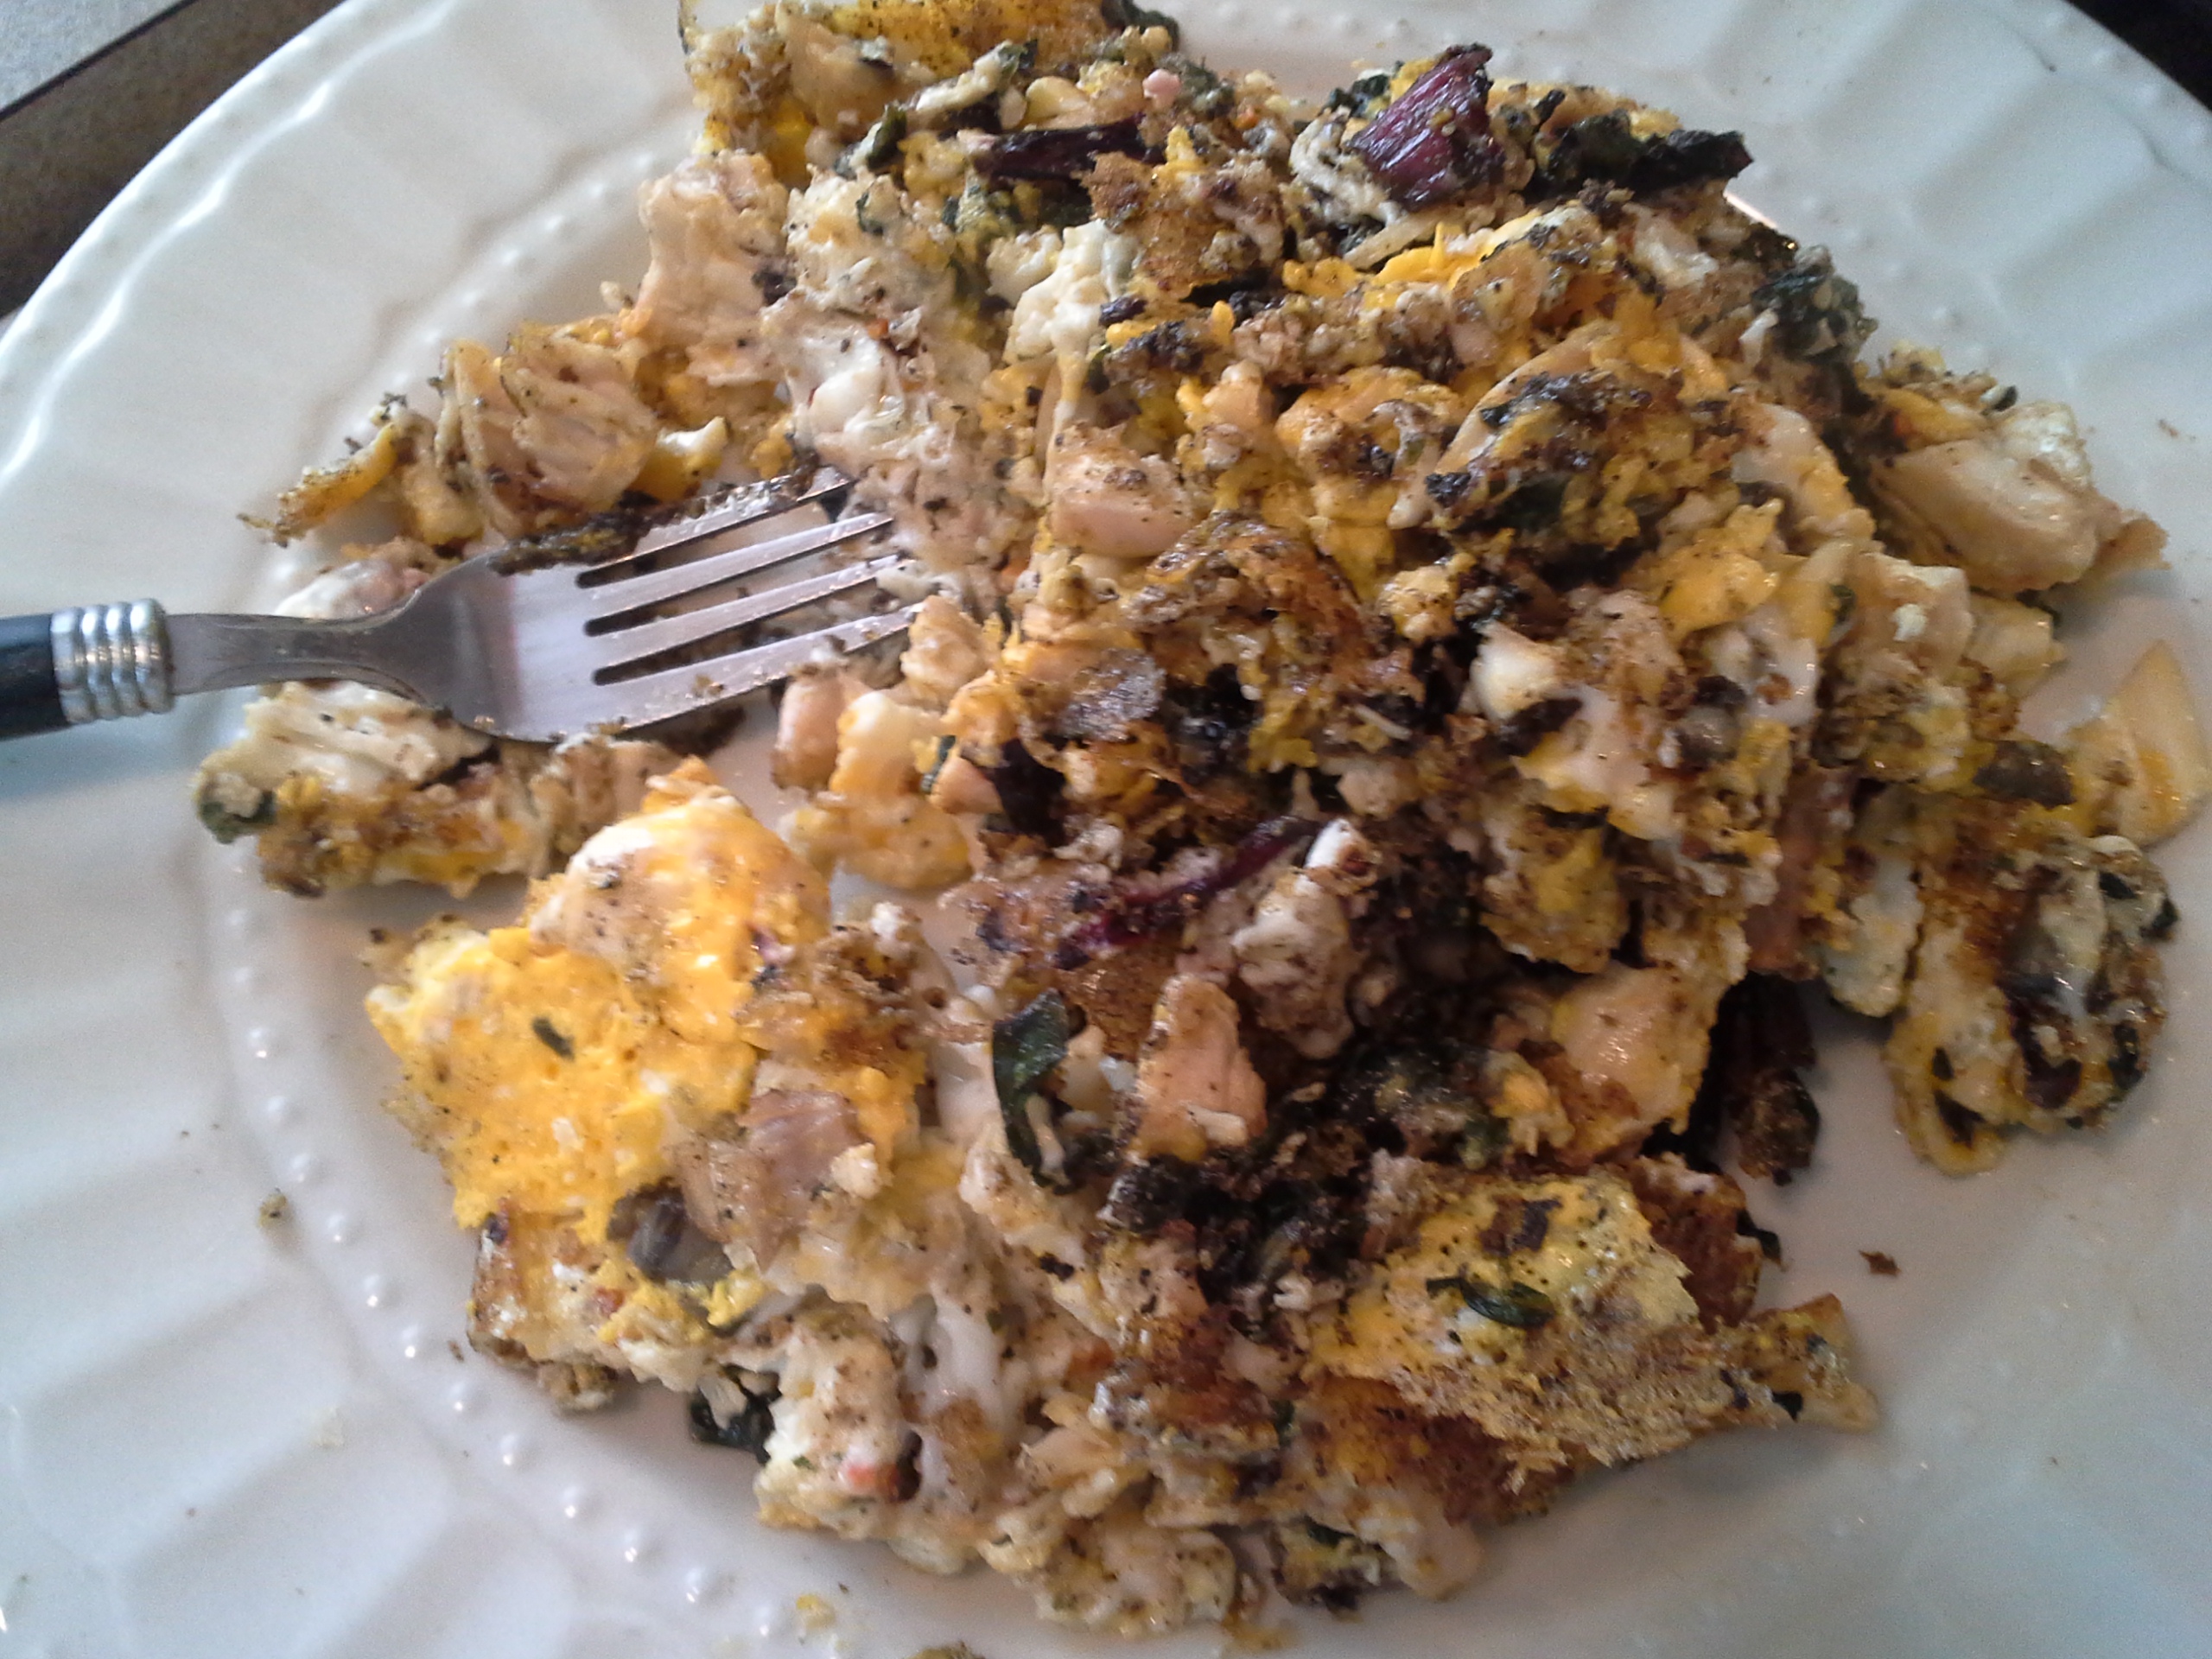 Breakfast: 11:30 a.m. | Leftover rotisserie chicken, 4 eggs, 2 oz. greens mix, 2 Tbsp. coconut oil, herbs & spices